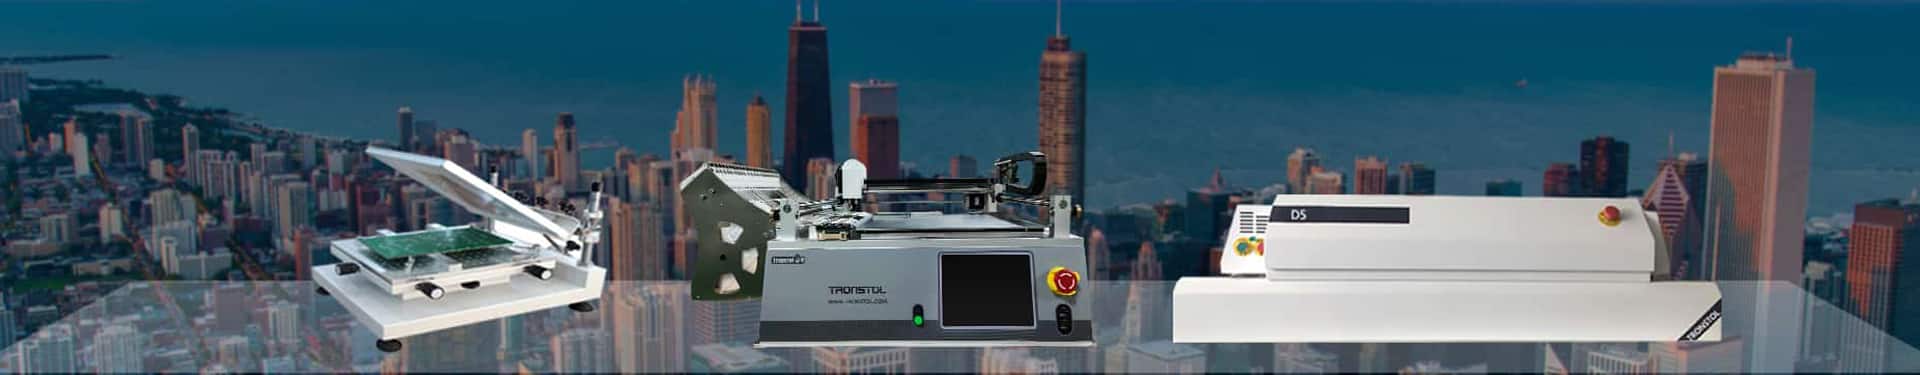 Tronstol 3v (Advanced) Pickup and placement Machine Series 10